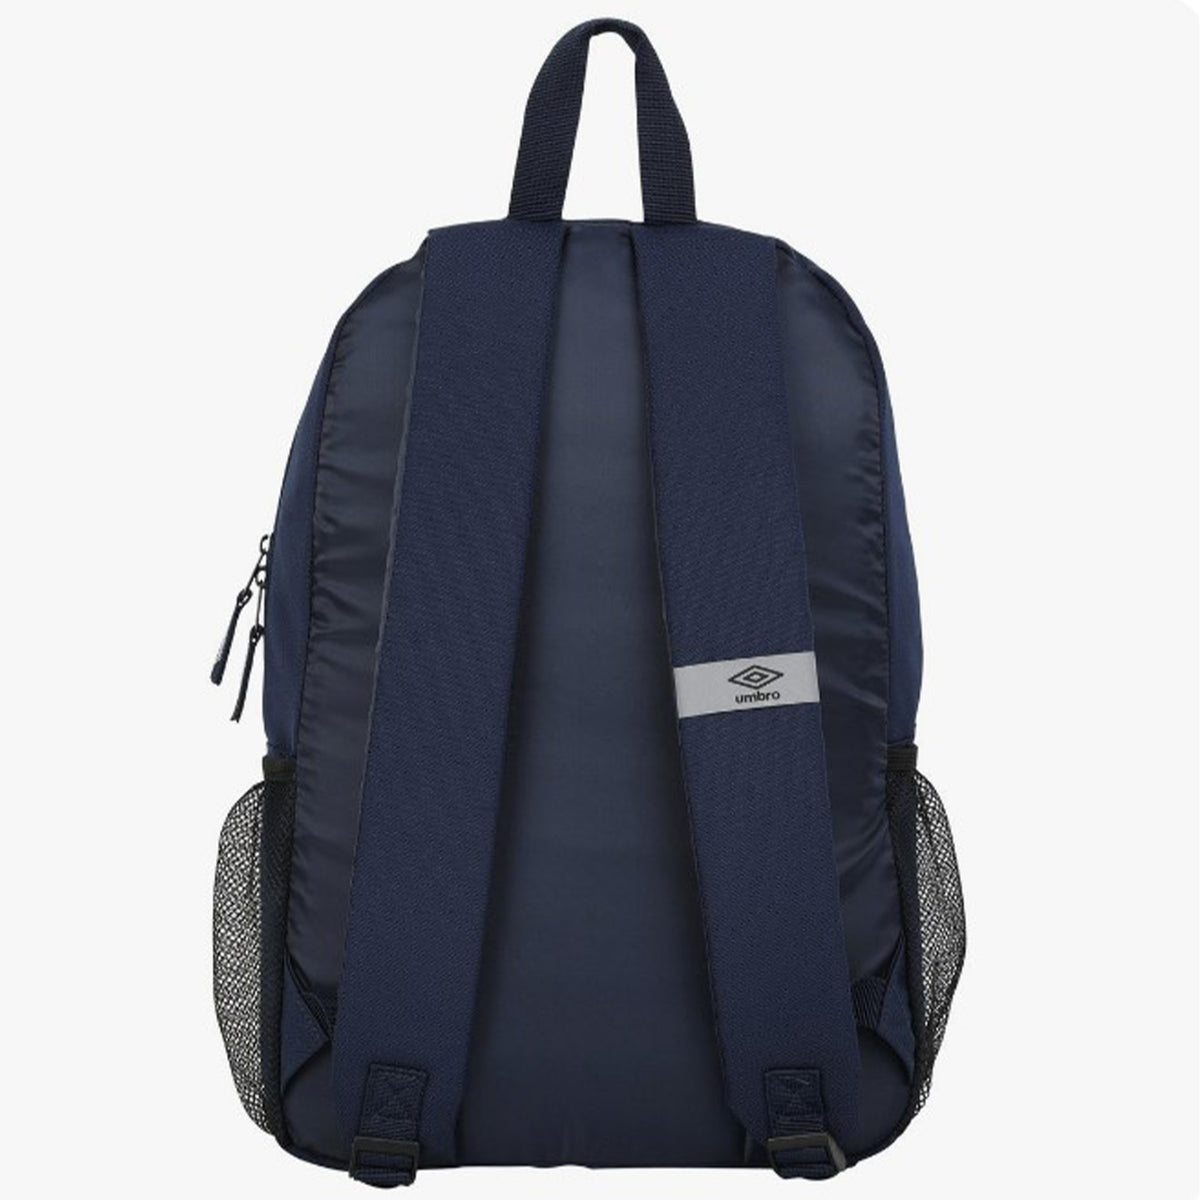 Umbro England Rugby Team Training Academy Backpack: Navy